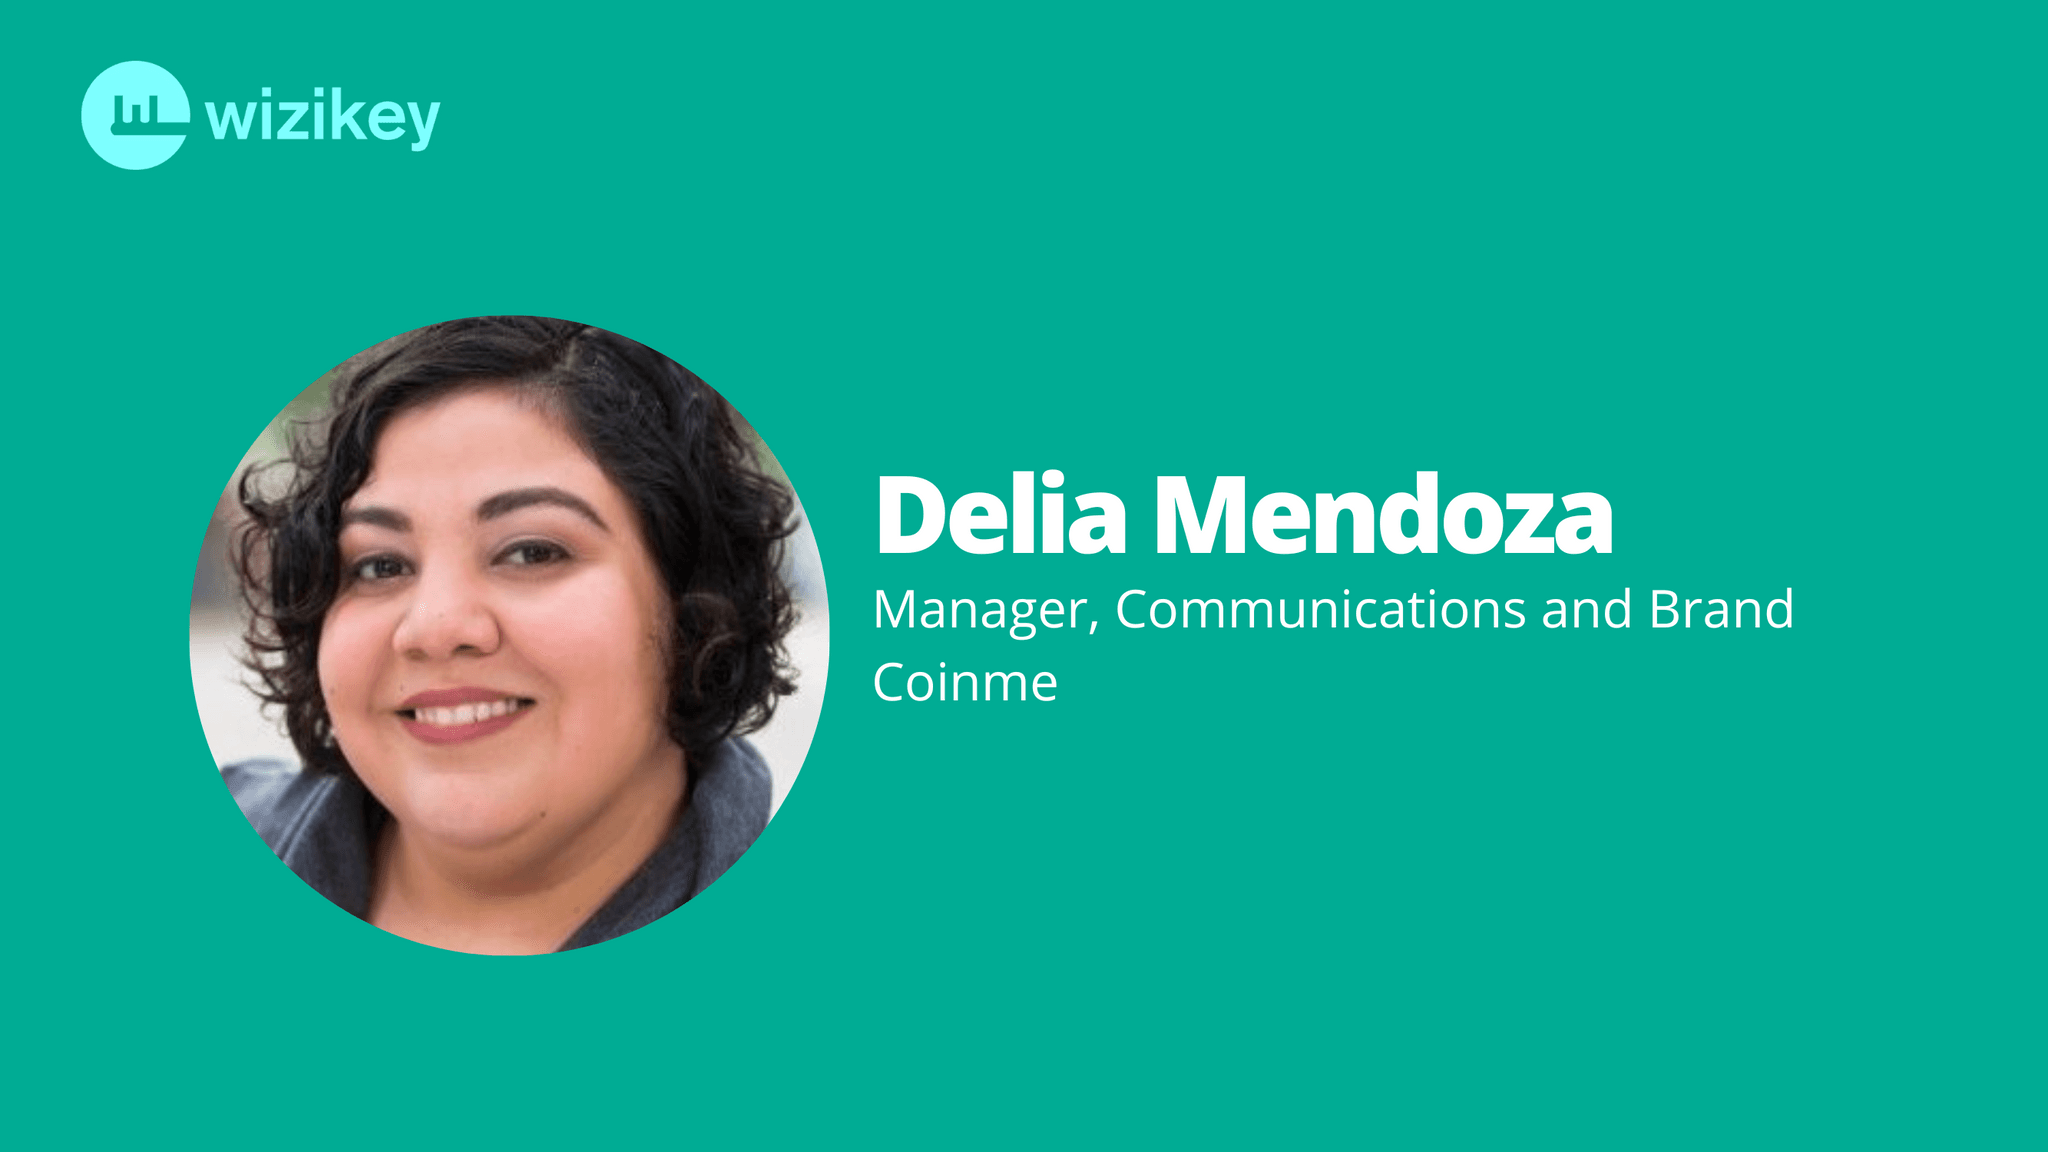 Always ask for the data: Delia from Coinme